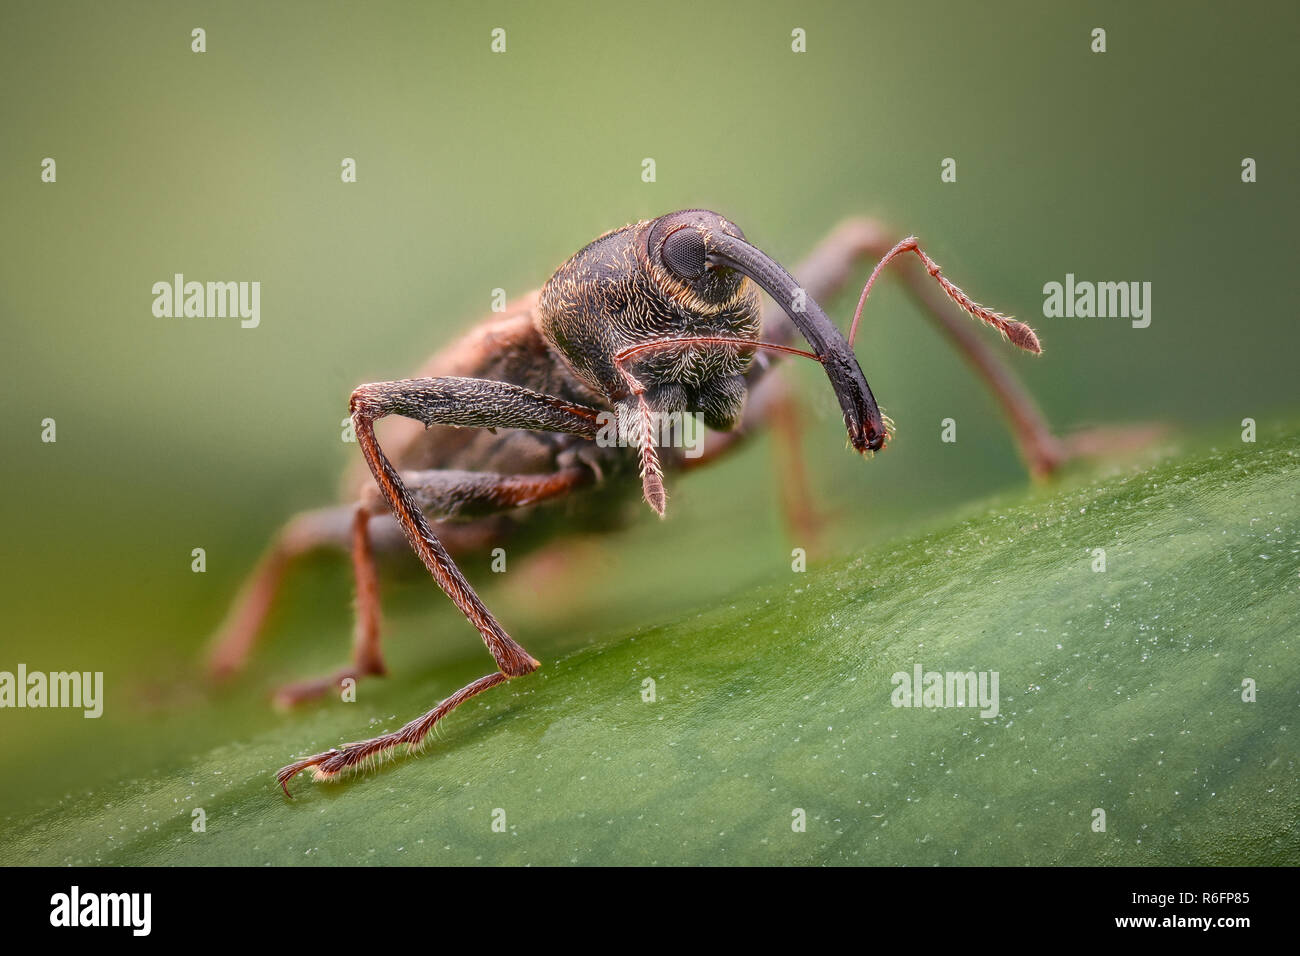 Extreme magnification - Weevil in the wild Stock Photo